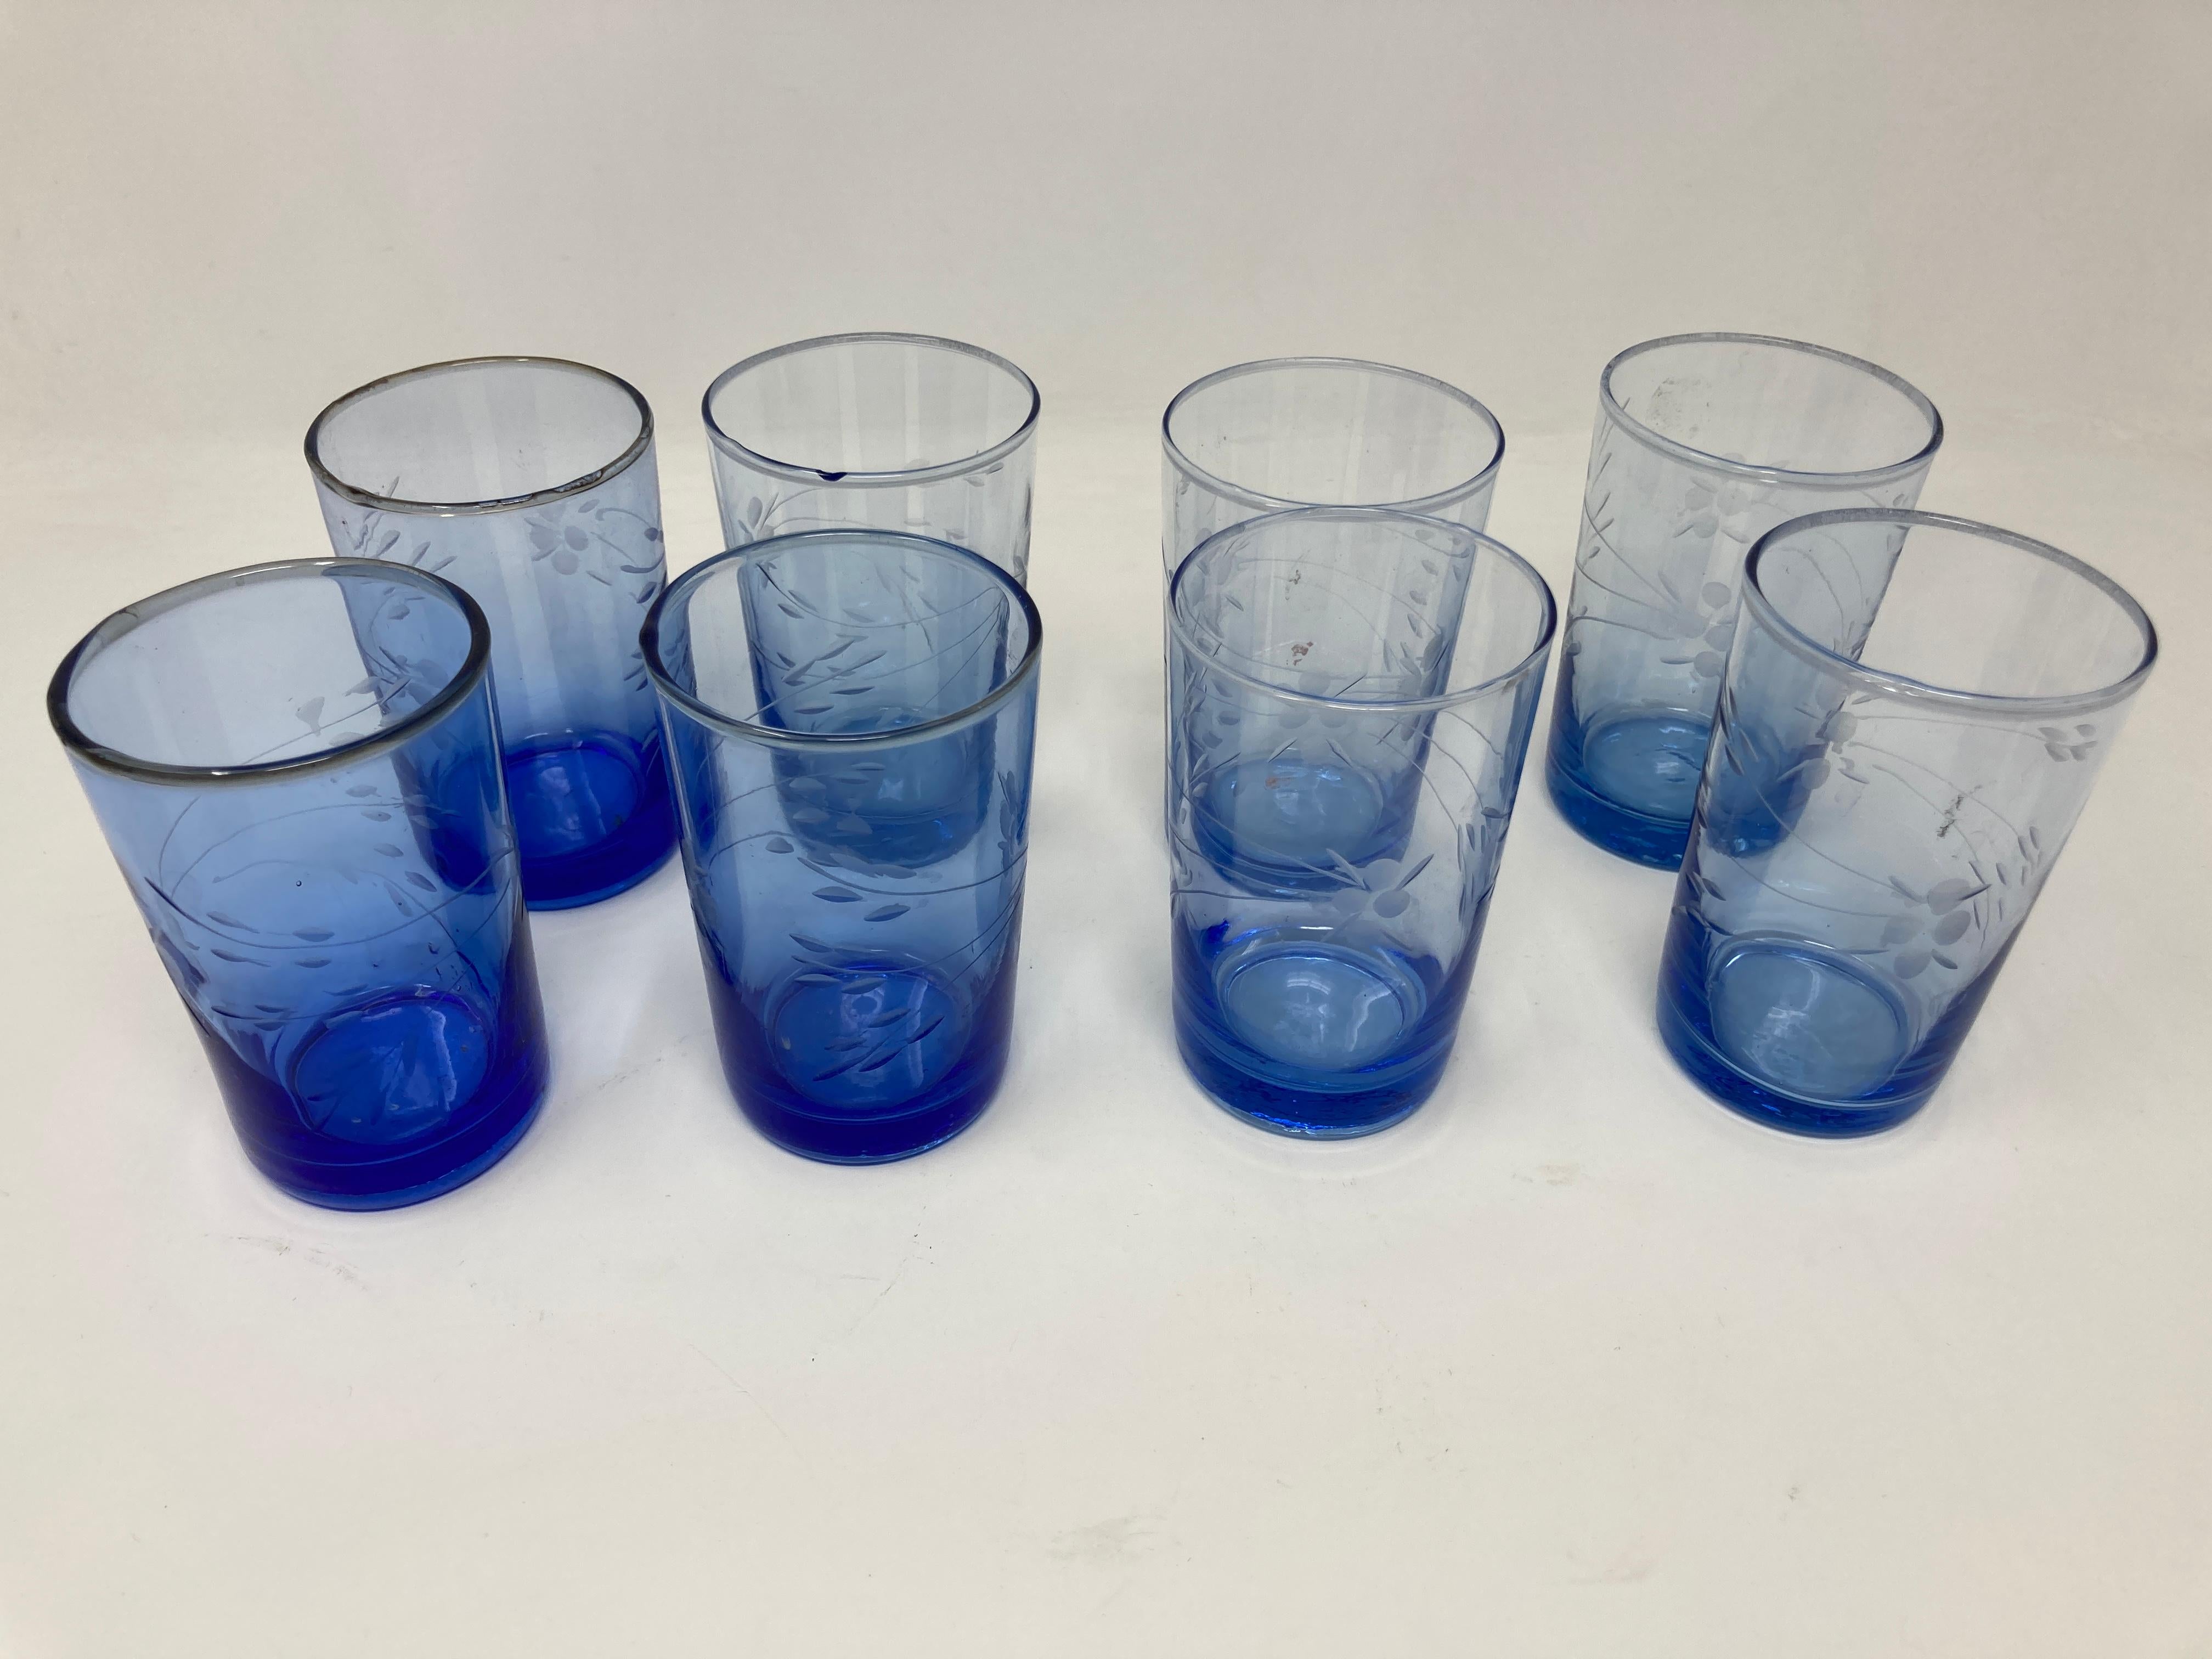 Set of six vintage Moroccan blue hand blown shot glasses.
Mouth blown glass with Moorish floral etched design great for mint tea or any drink cold or hot.
Handmade Bohemia style stained glass.
Collectible hand blown glassware set
Very light and